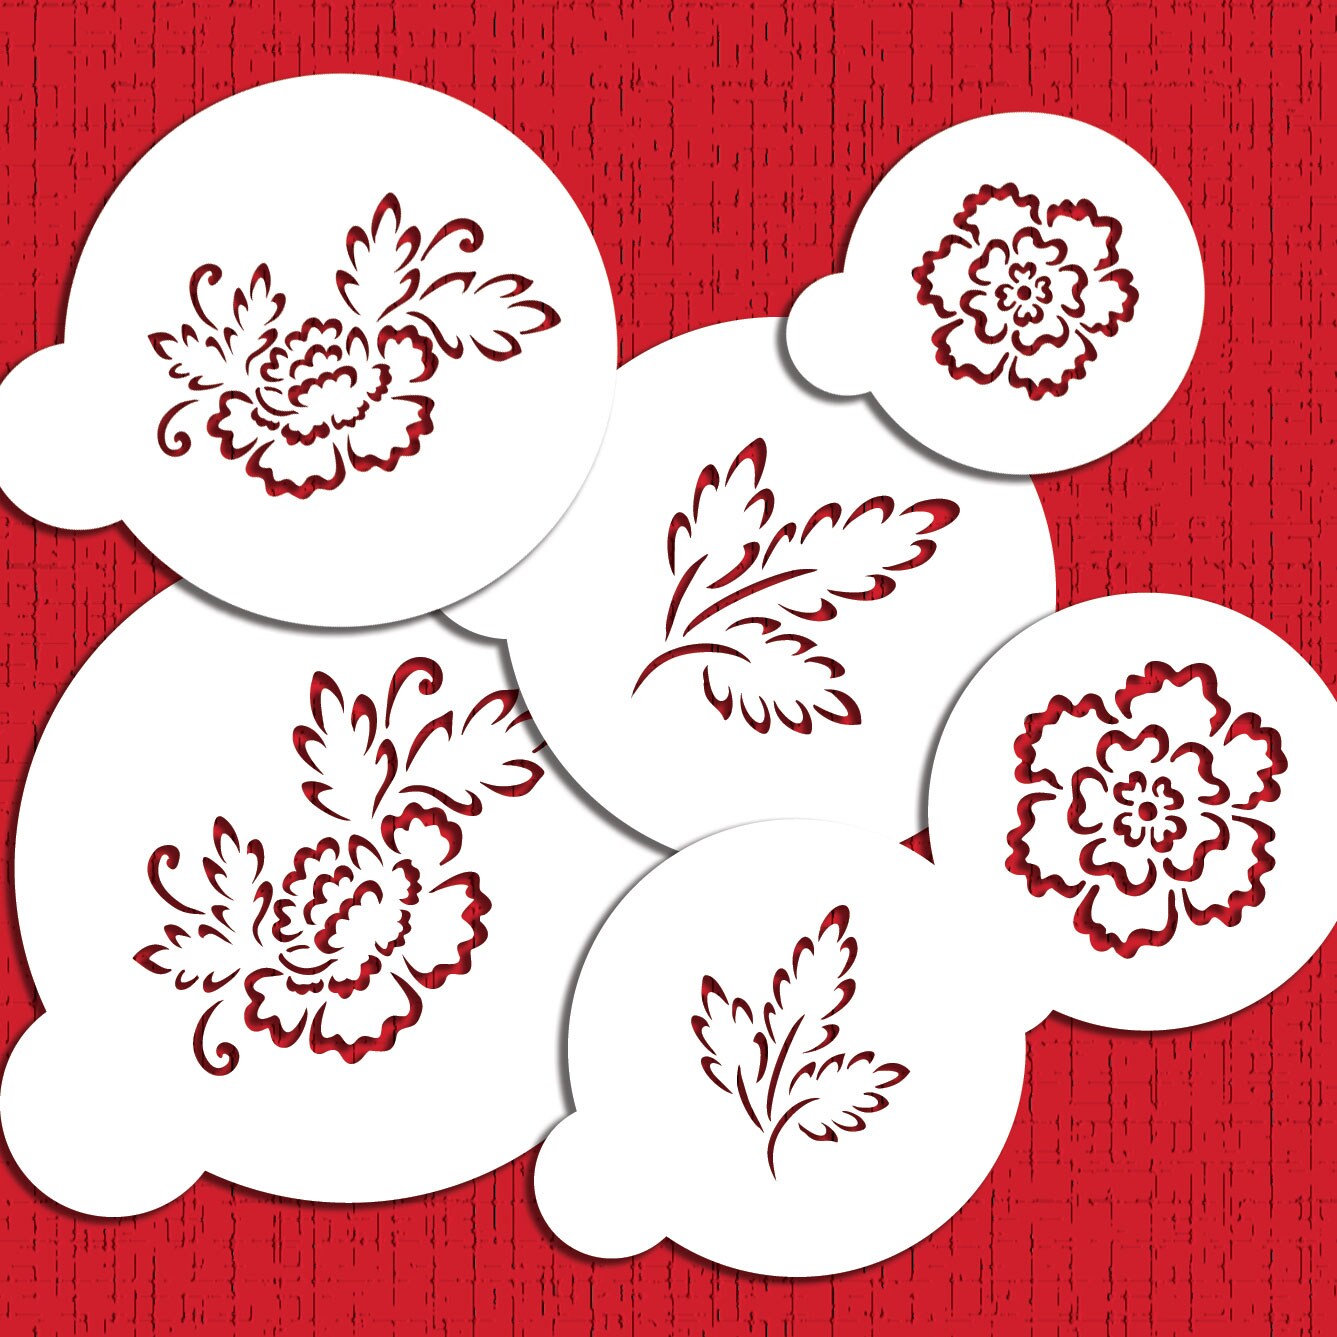 Brush Embroidery Flower Cookie Stencil Set | C790 by Designer Stencils | Cookie Decorating Tools | Baking Stencils for Royal Icing, Airbrush, Dusting Powder | Reusable Plastic Food Grade Stencil for Cookies | Easy to Use &#x26; Clean Cookie Stencil